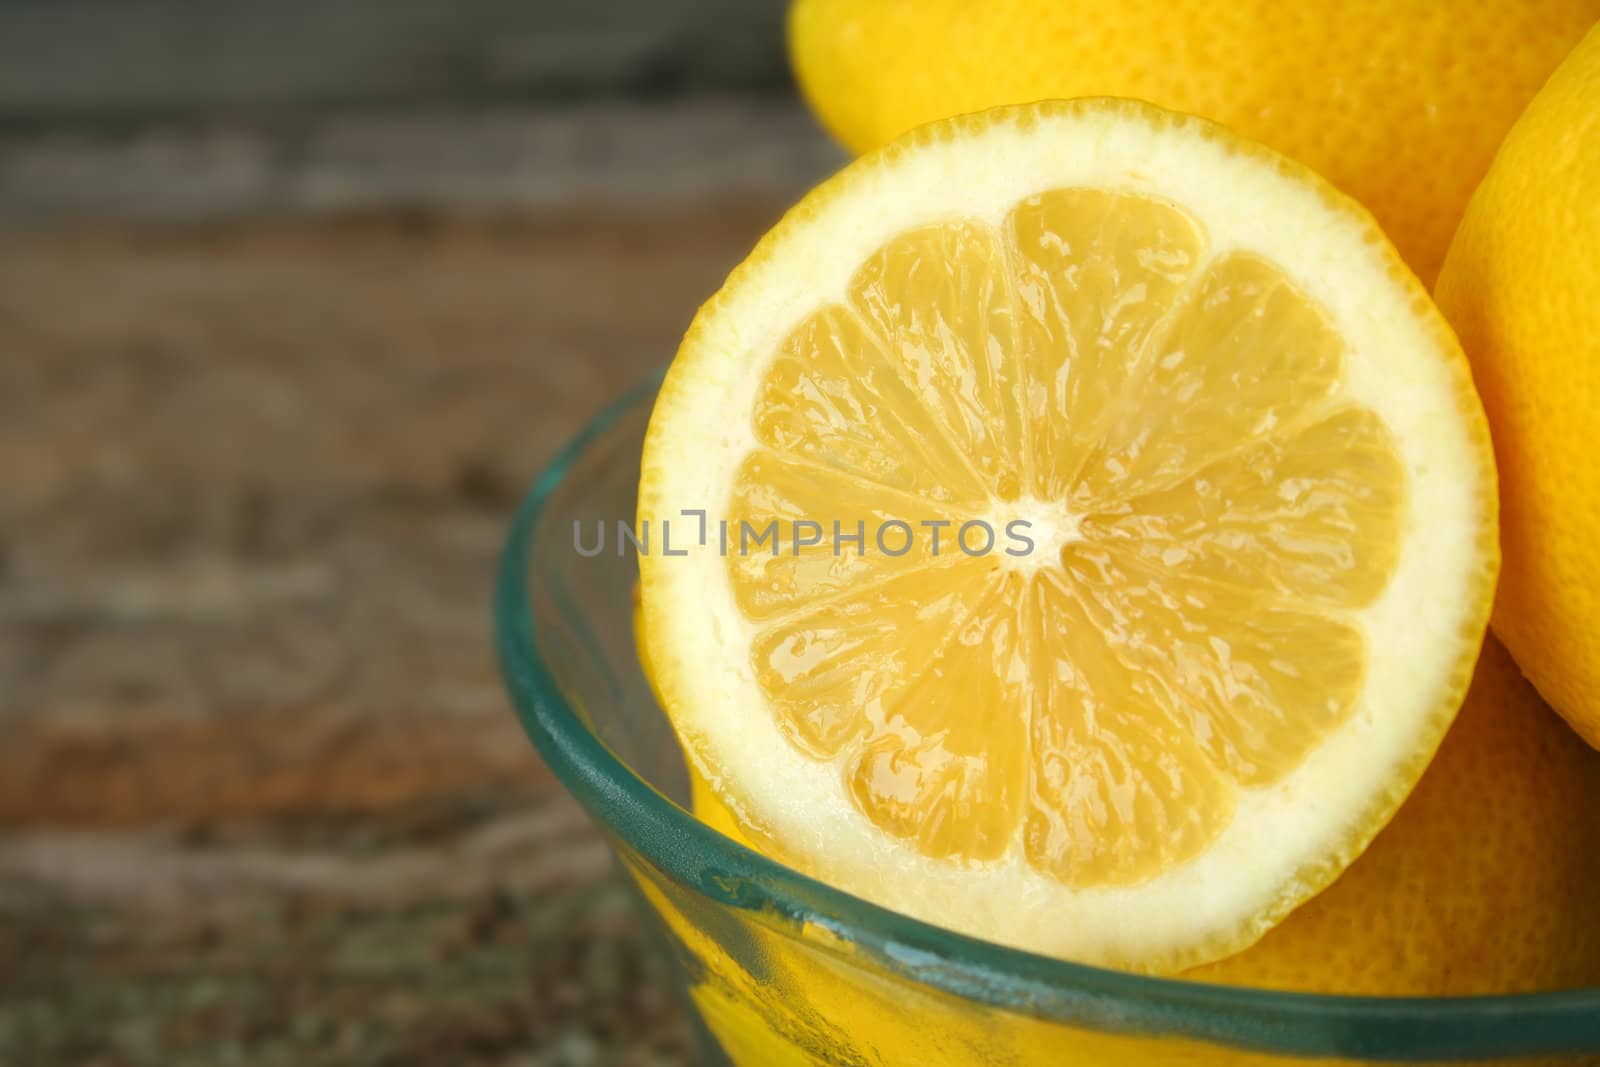 Close up of a sliced lemon in a bowl full of whole lemons.
Copy space available.